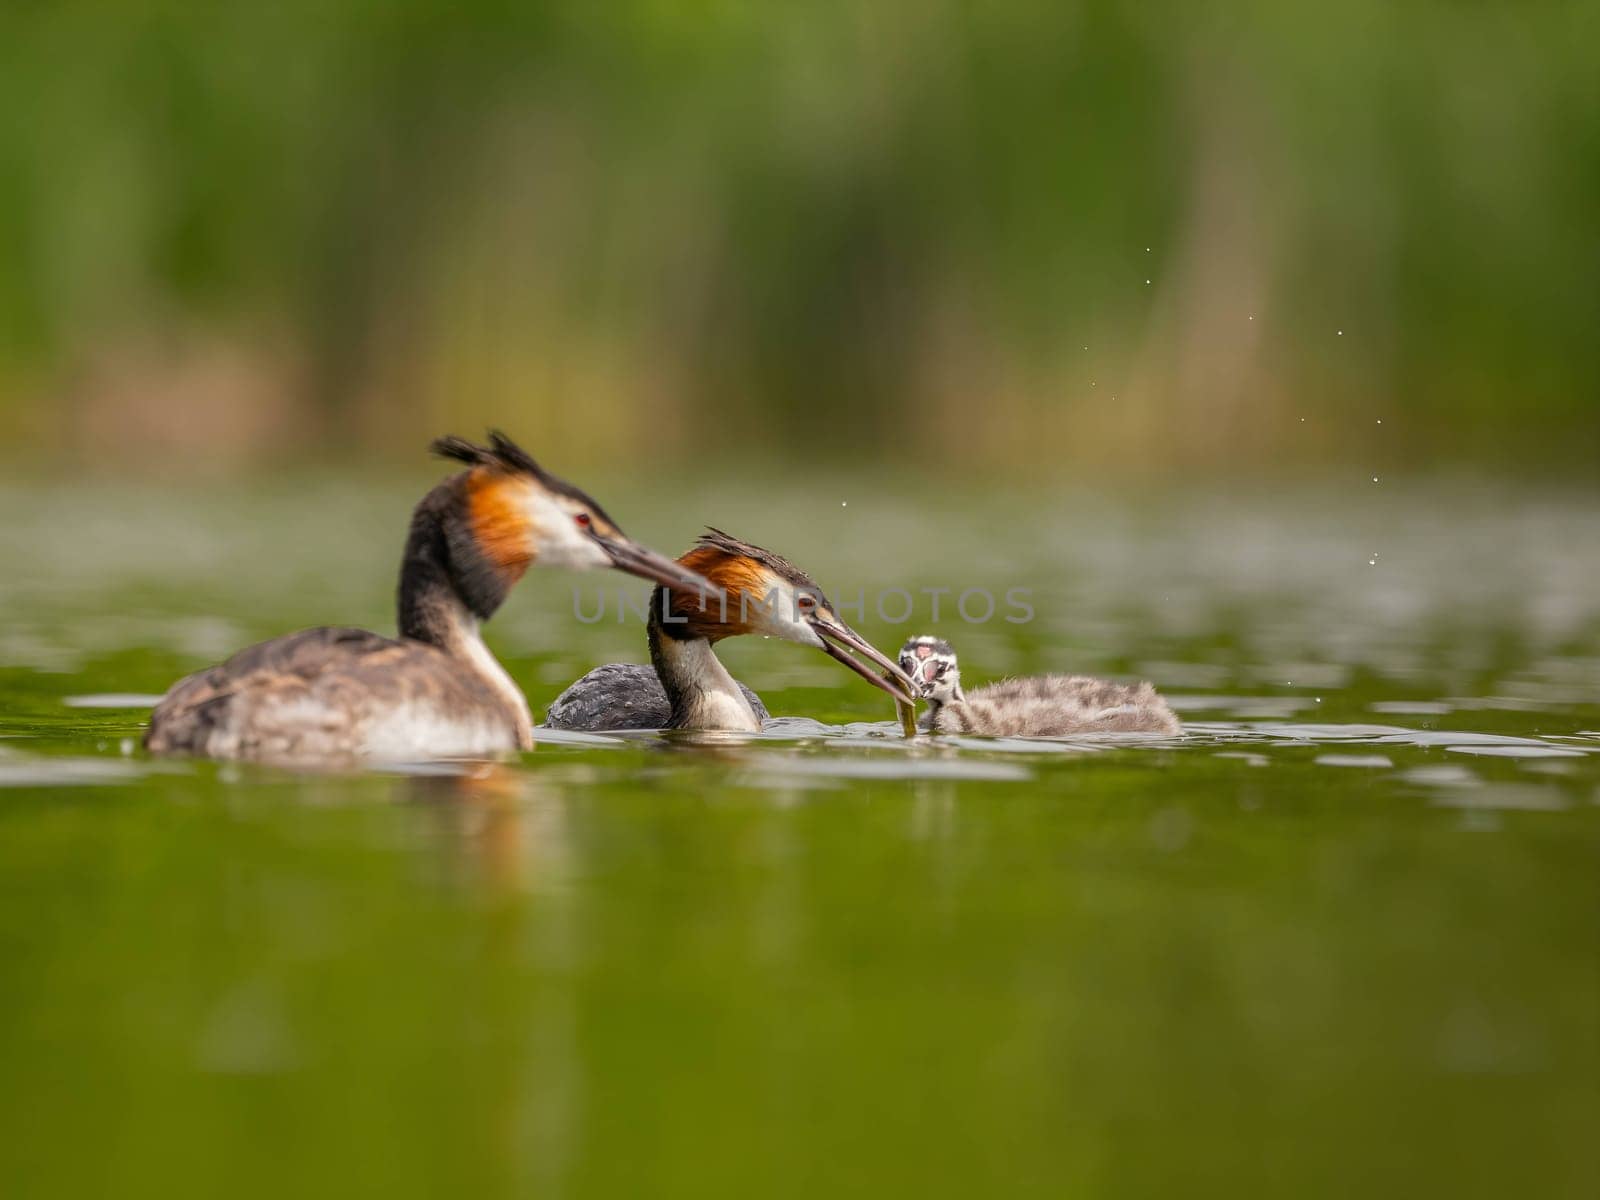 Two Great Crested Grebes, accompanied by their young one, glide gracefully on the water's surface, amidst a backdrop of lush green scenery.